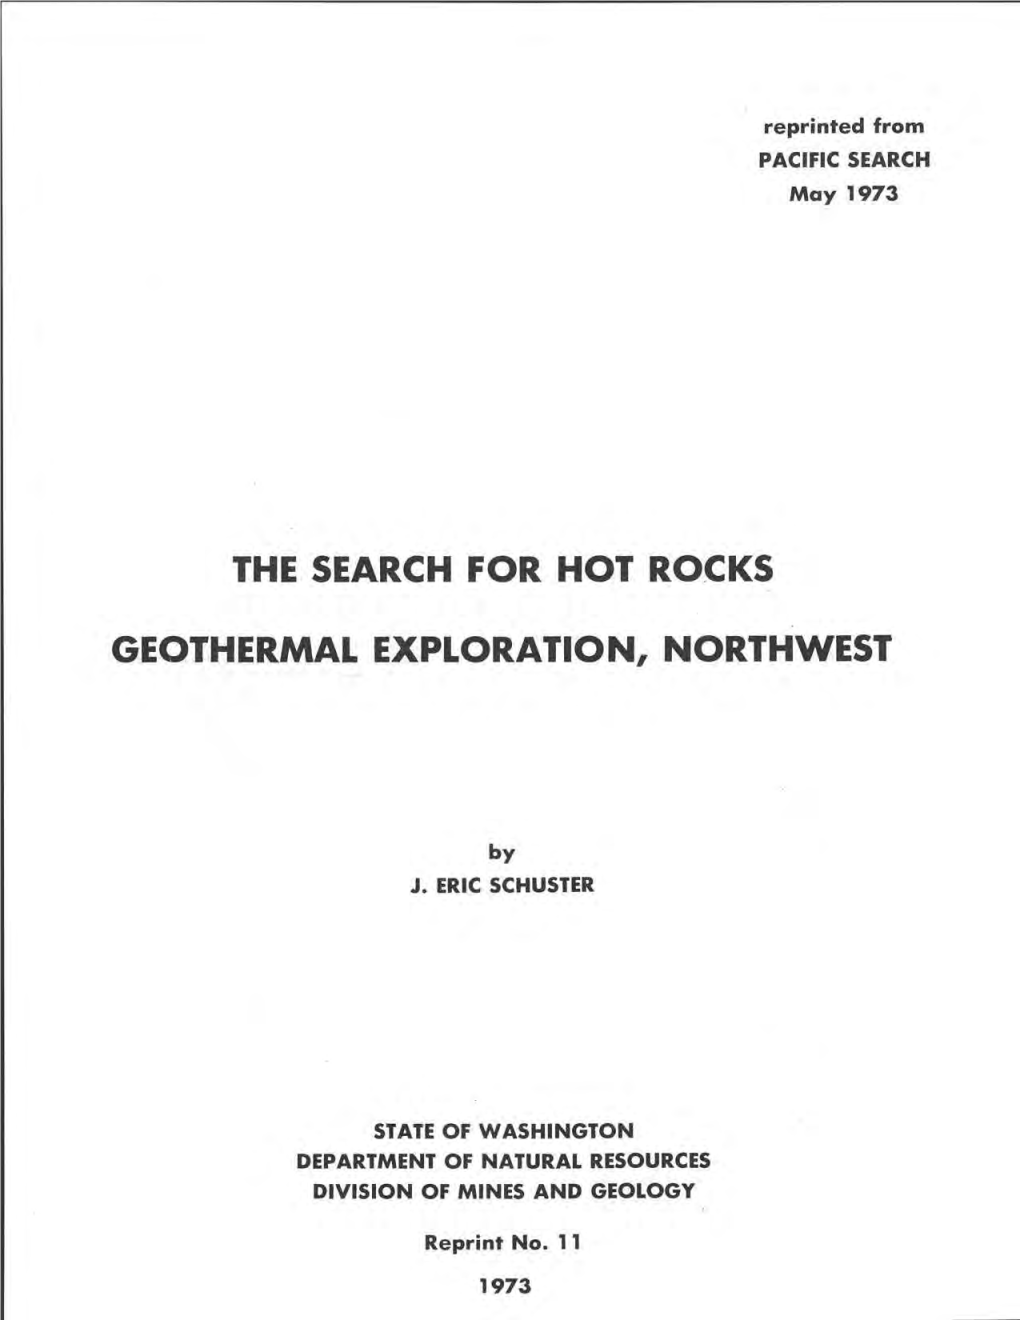 Reprint 11. the Search for Hot Rocks--Geothermal Exploration, Northwest